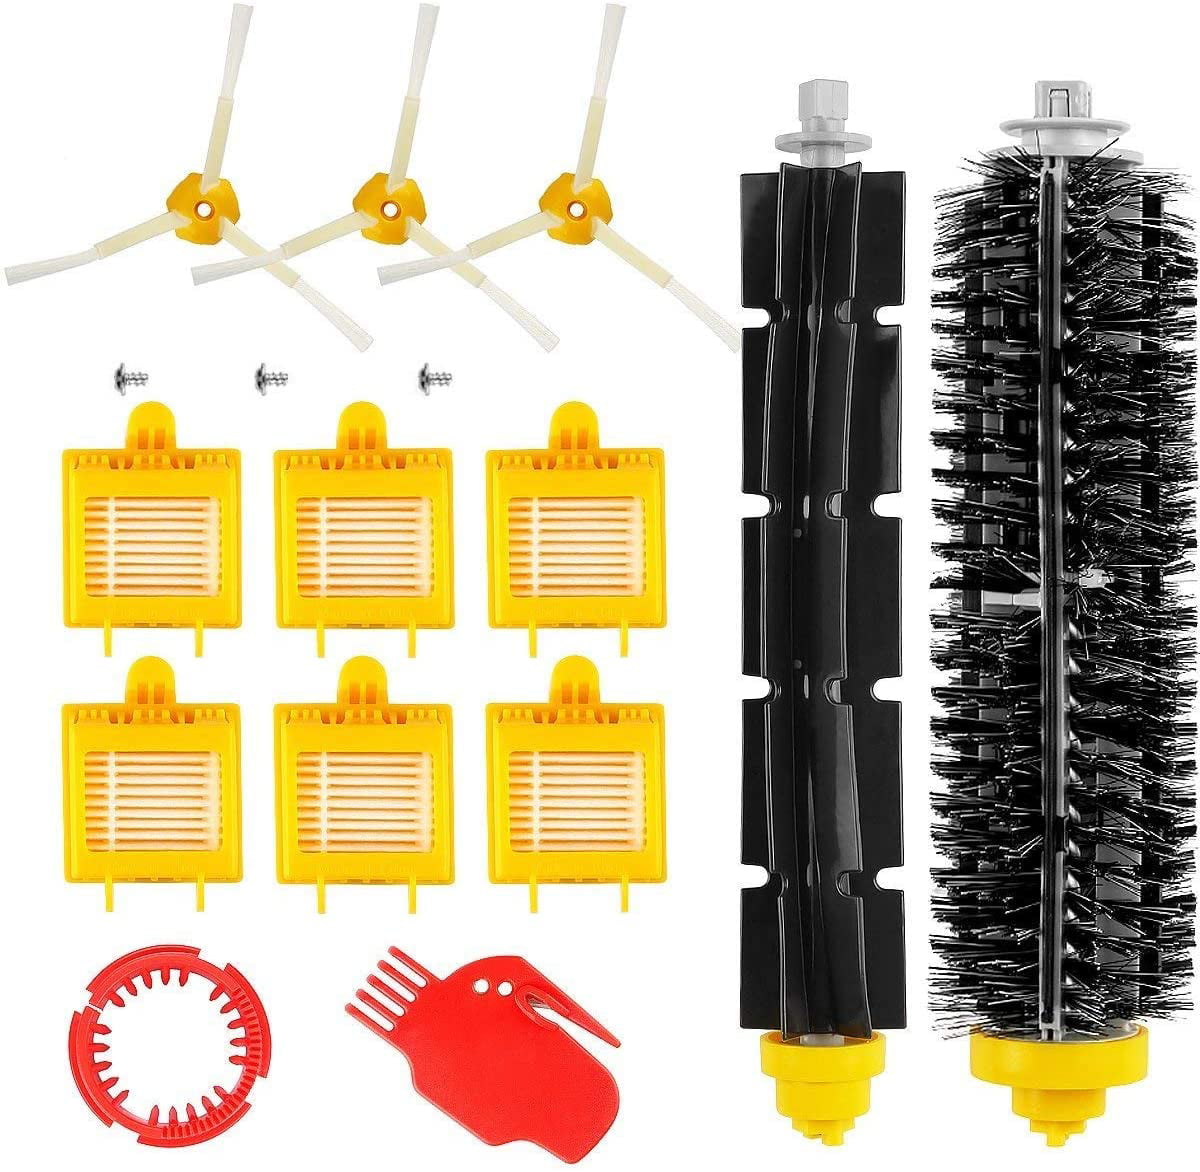 Brushes Filters Side Brushes Kits For iRobot Roomba Vacuum Cleaner Parts 760 770 